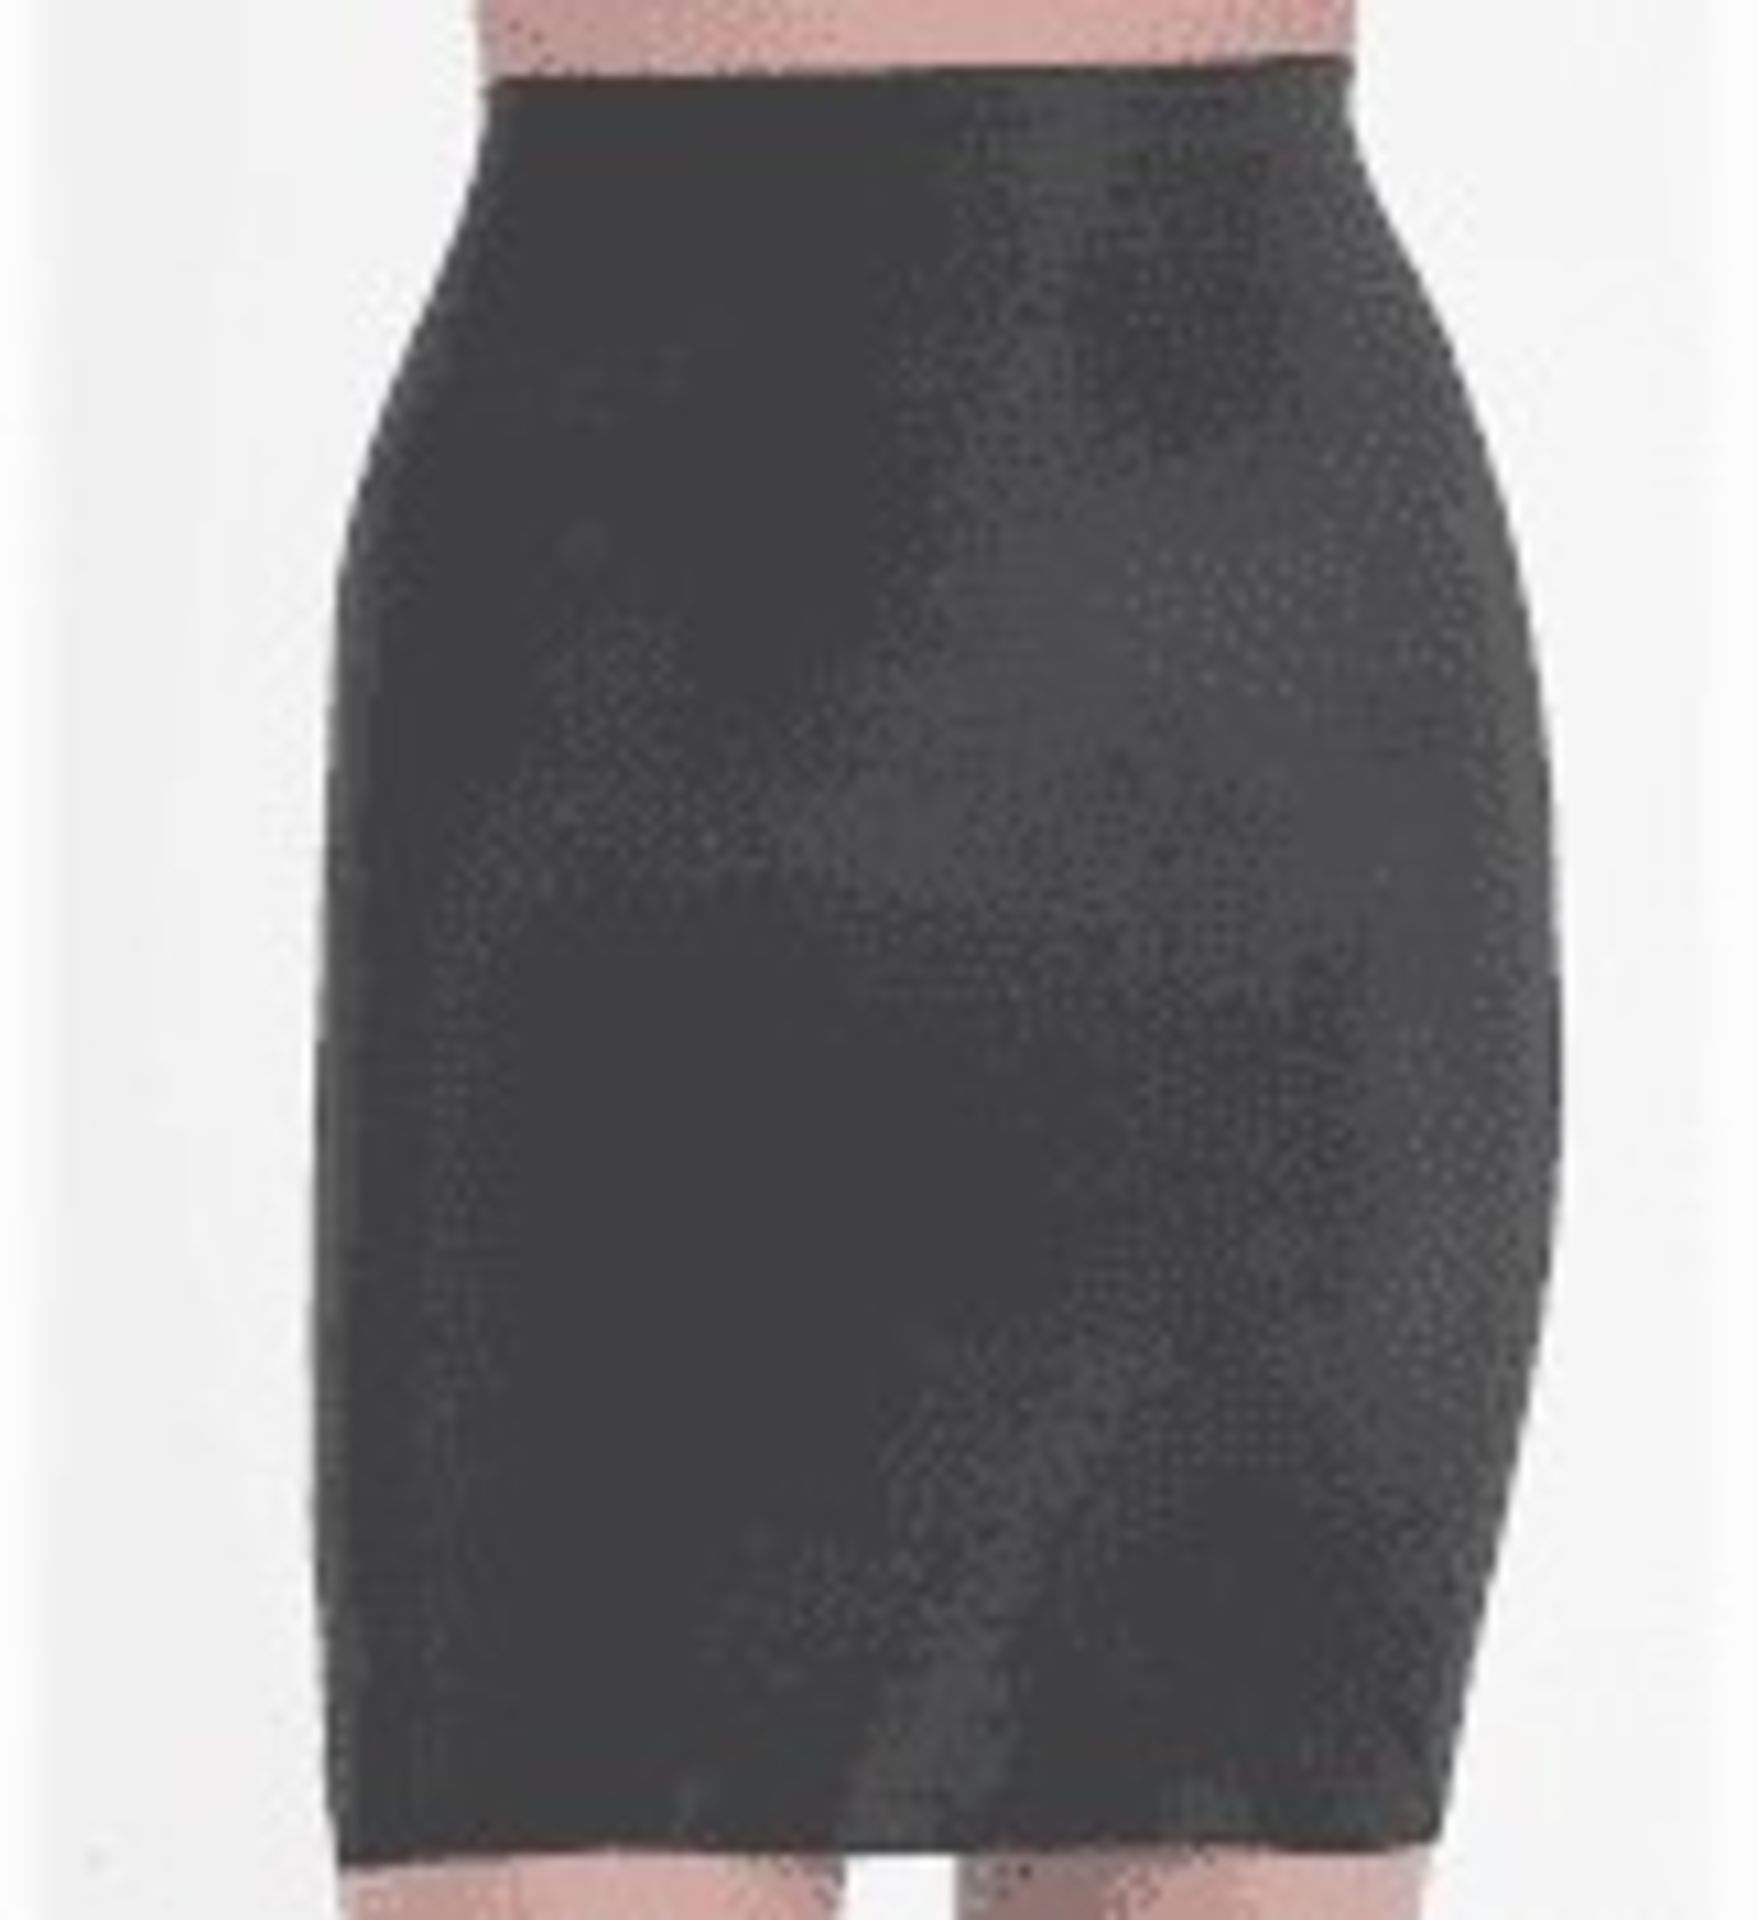 1 LOT TO CONTAIN 5 SPANX SKIRTS IN BOLD BLACK / SIZE 12 / STYLE 1899 / RRP £440.00 (PUBLIC VIEWING - Image 2 of 2